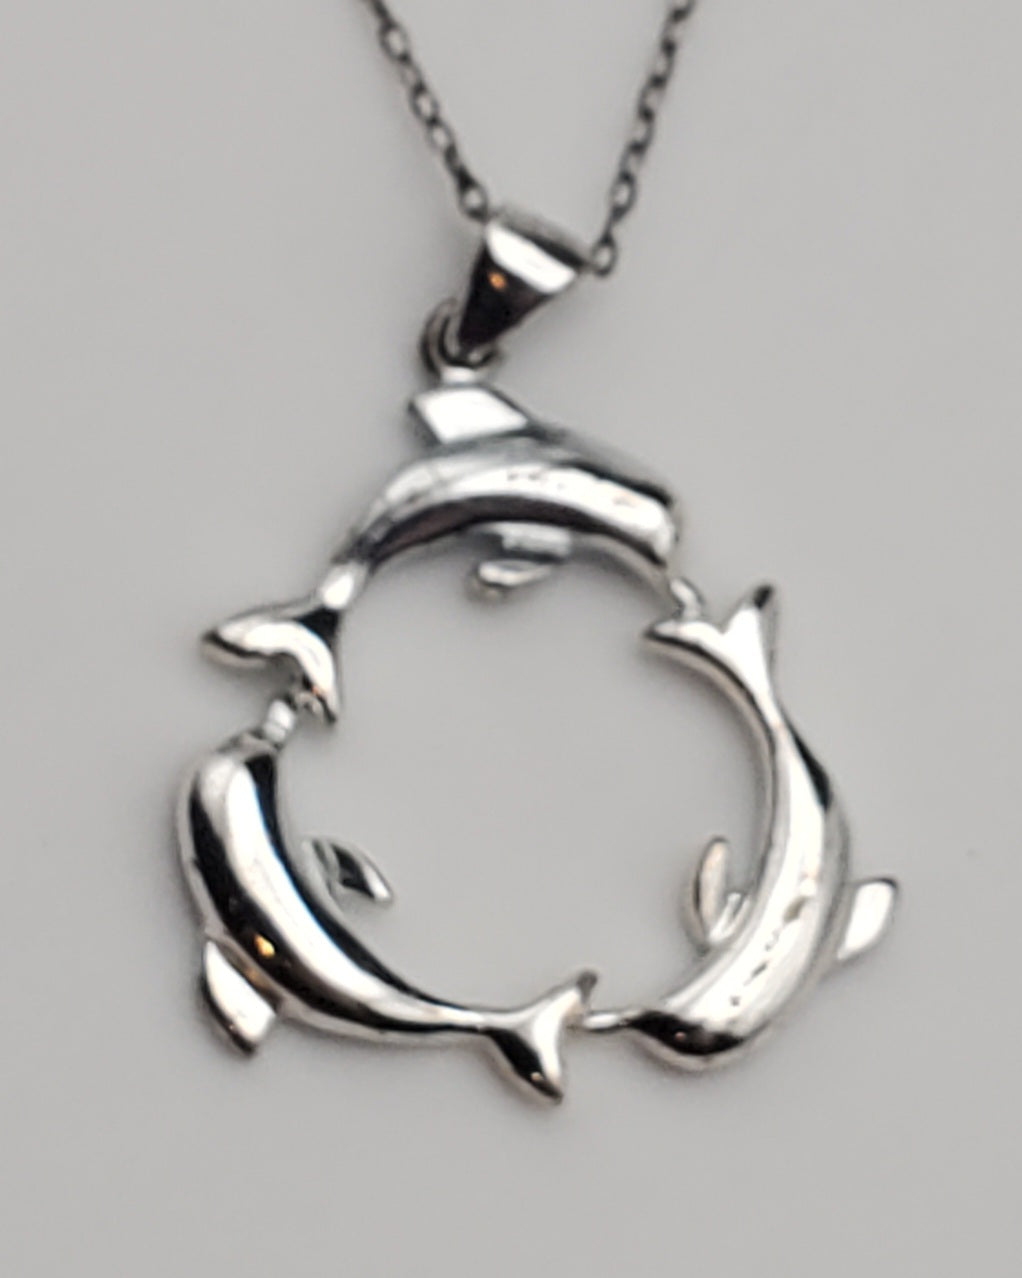 Dolphins Sterling Silver Hoop Pendant on Sterling Silver Chain Necklace - 18.5"